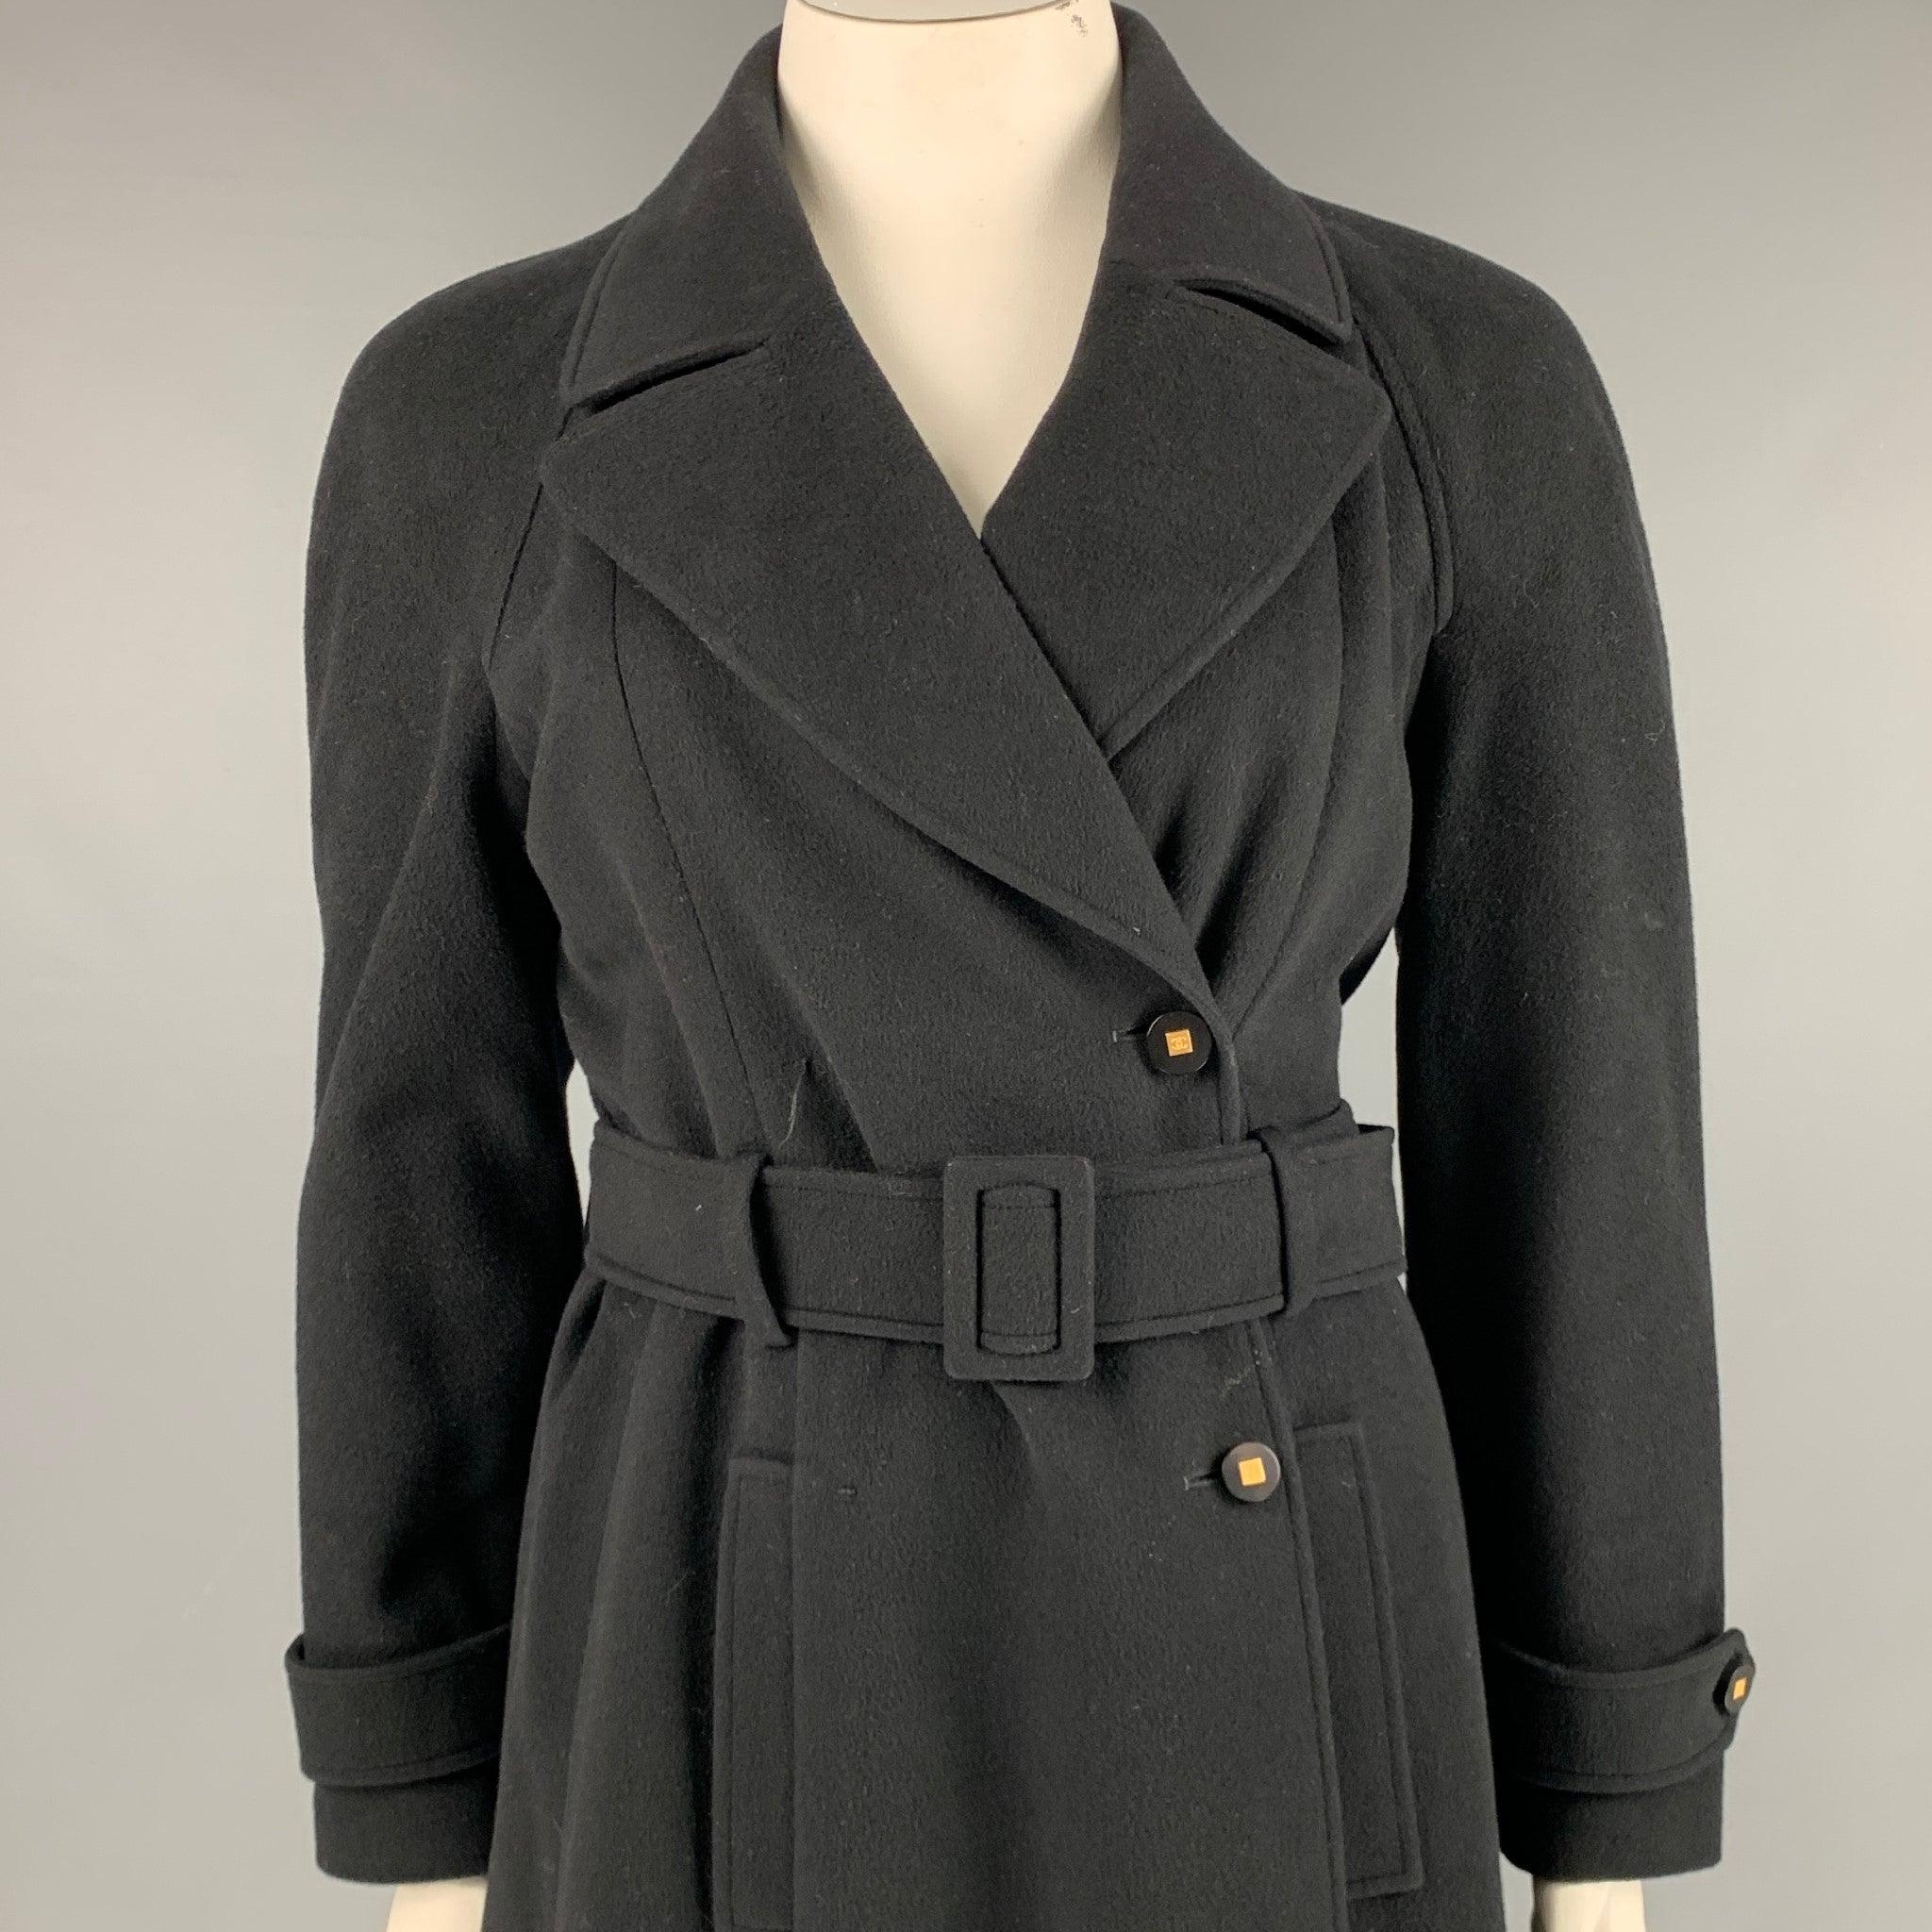 Vintage CHANEL 1996 coat
in a
black cashmere fabric with silk lining featuring a single breasted style, gold tone hardware, and belt. Made in France.Very Good Pre-Owned Condition. Minor marks. 

Marked:   FR 42 

Measurements: 
 
Shoulder: 18.5